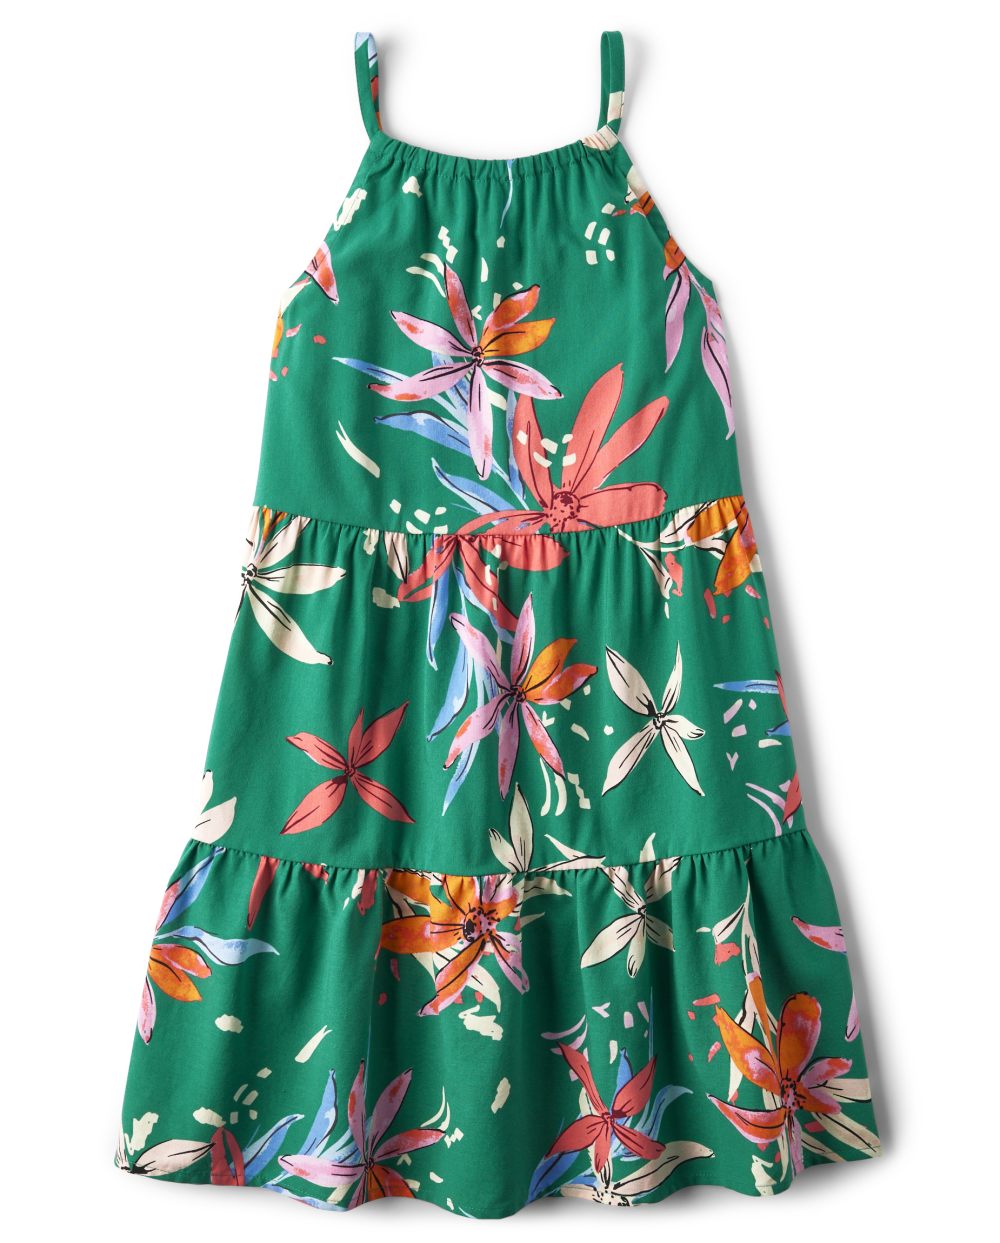 Girls Above the Knee Floral Tropical Print Sleeveless Tiered Halter Dress